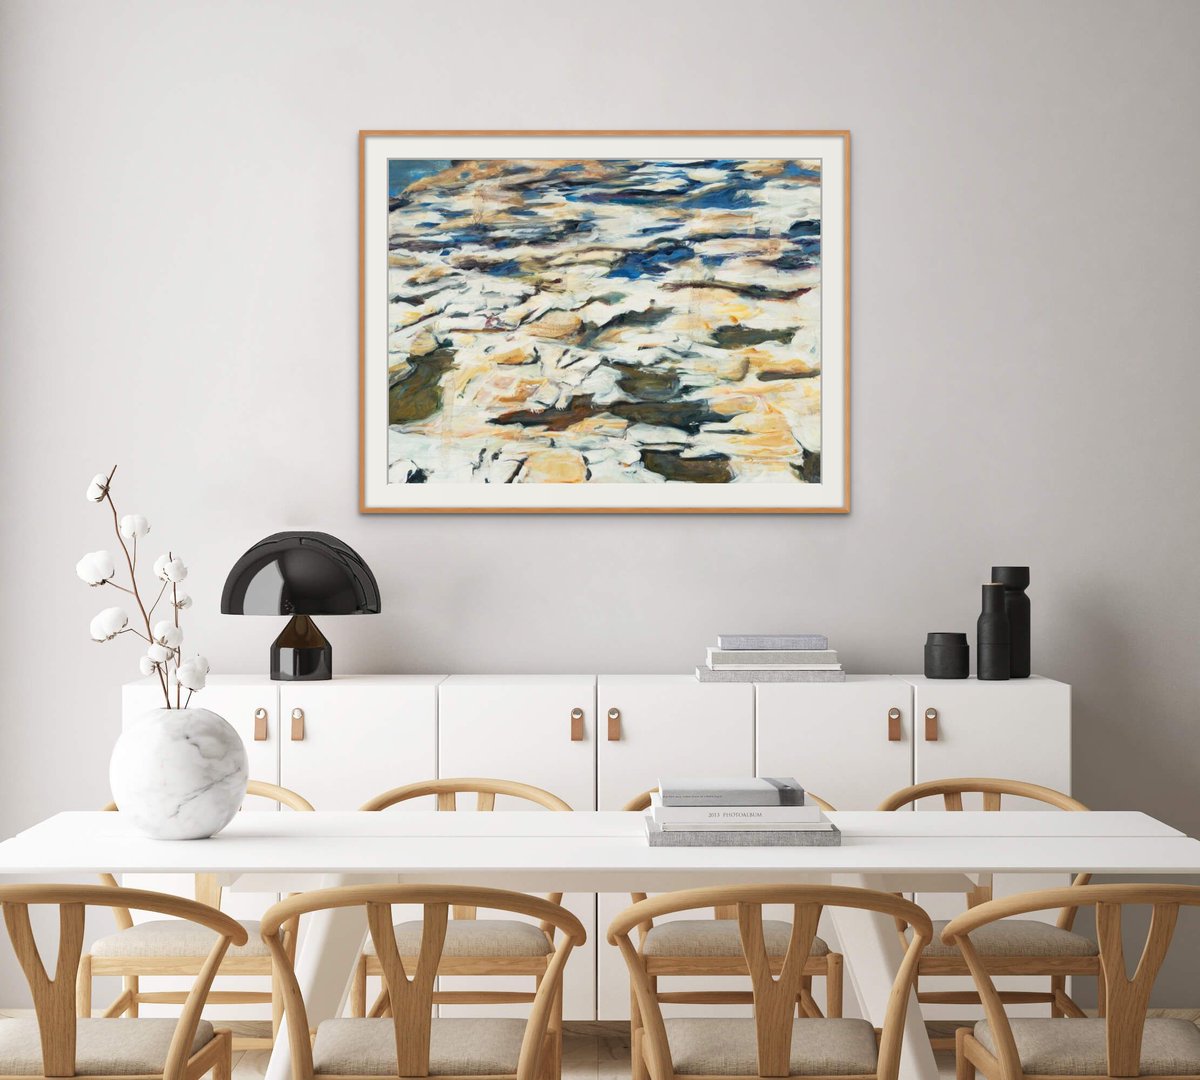 Are you getting ready to do some holiday hosting? Decking your walls with the perfect decor will ensure that your dining room is ready for all your festivities! #holidayhosting #interiordesign #wallart #artdecor #hyggestyle #neutralstyle #artpublishing #artconsulting #walldecor